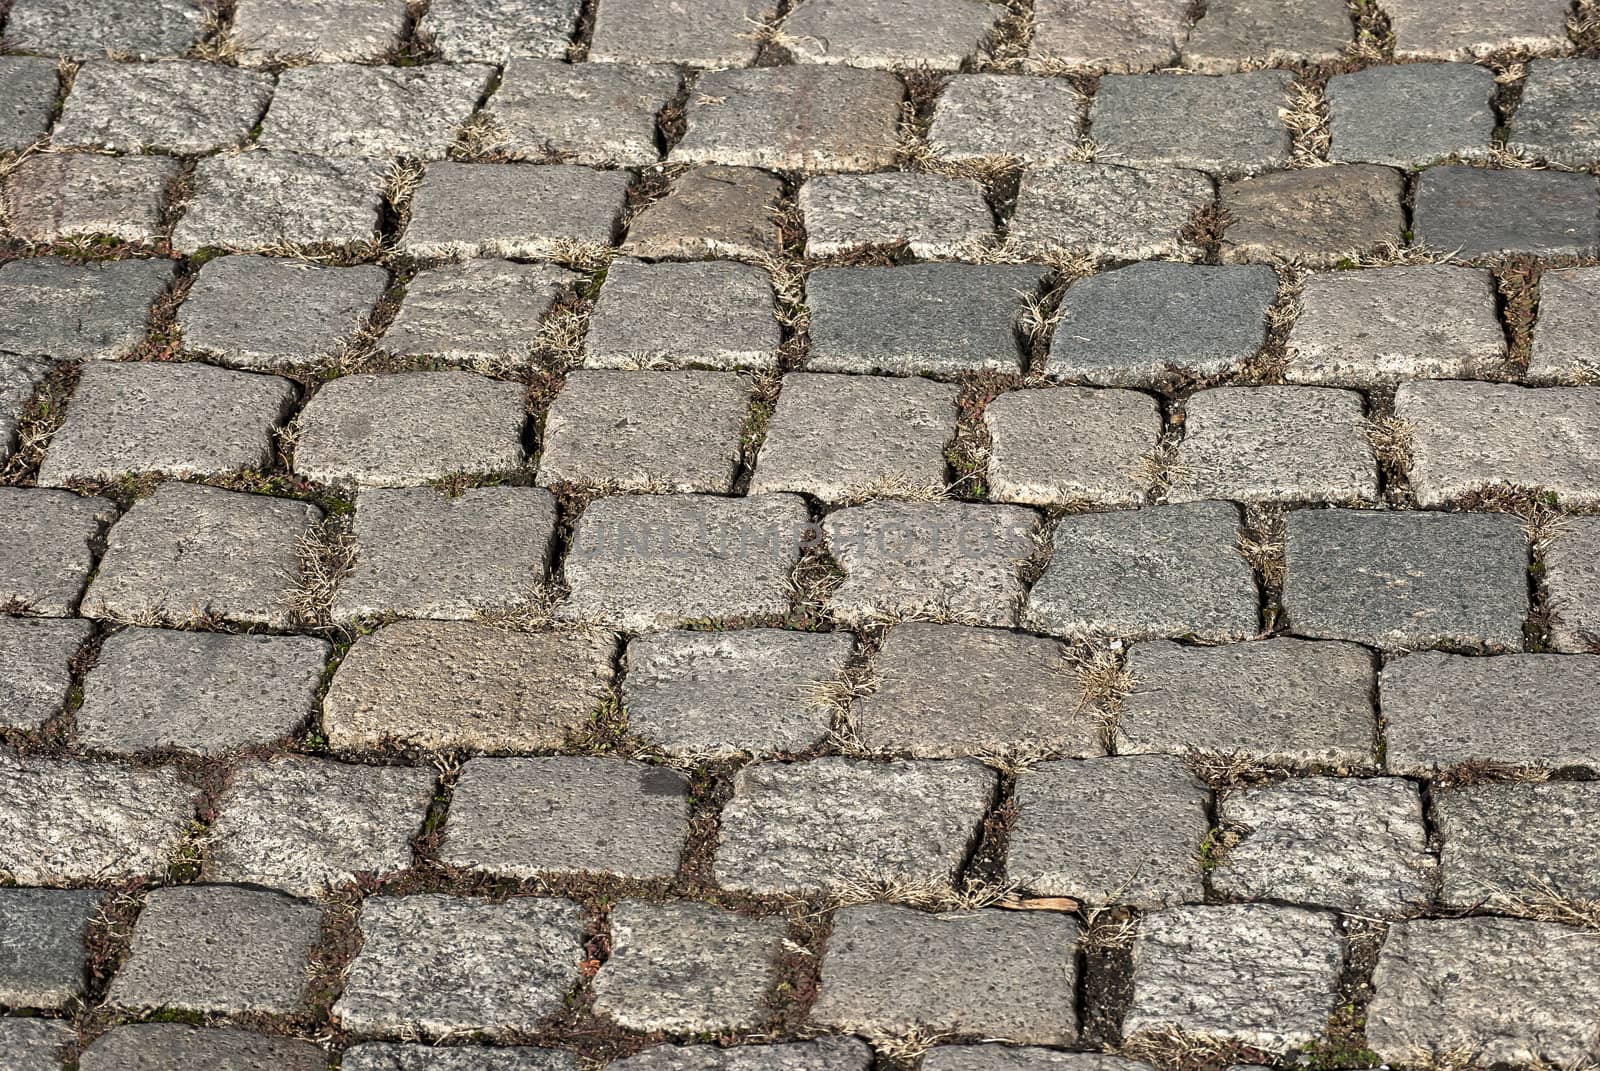 Granite gray town pavement close-up as background